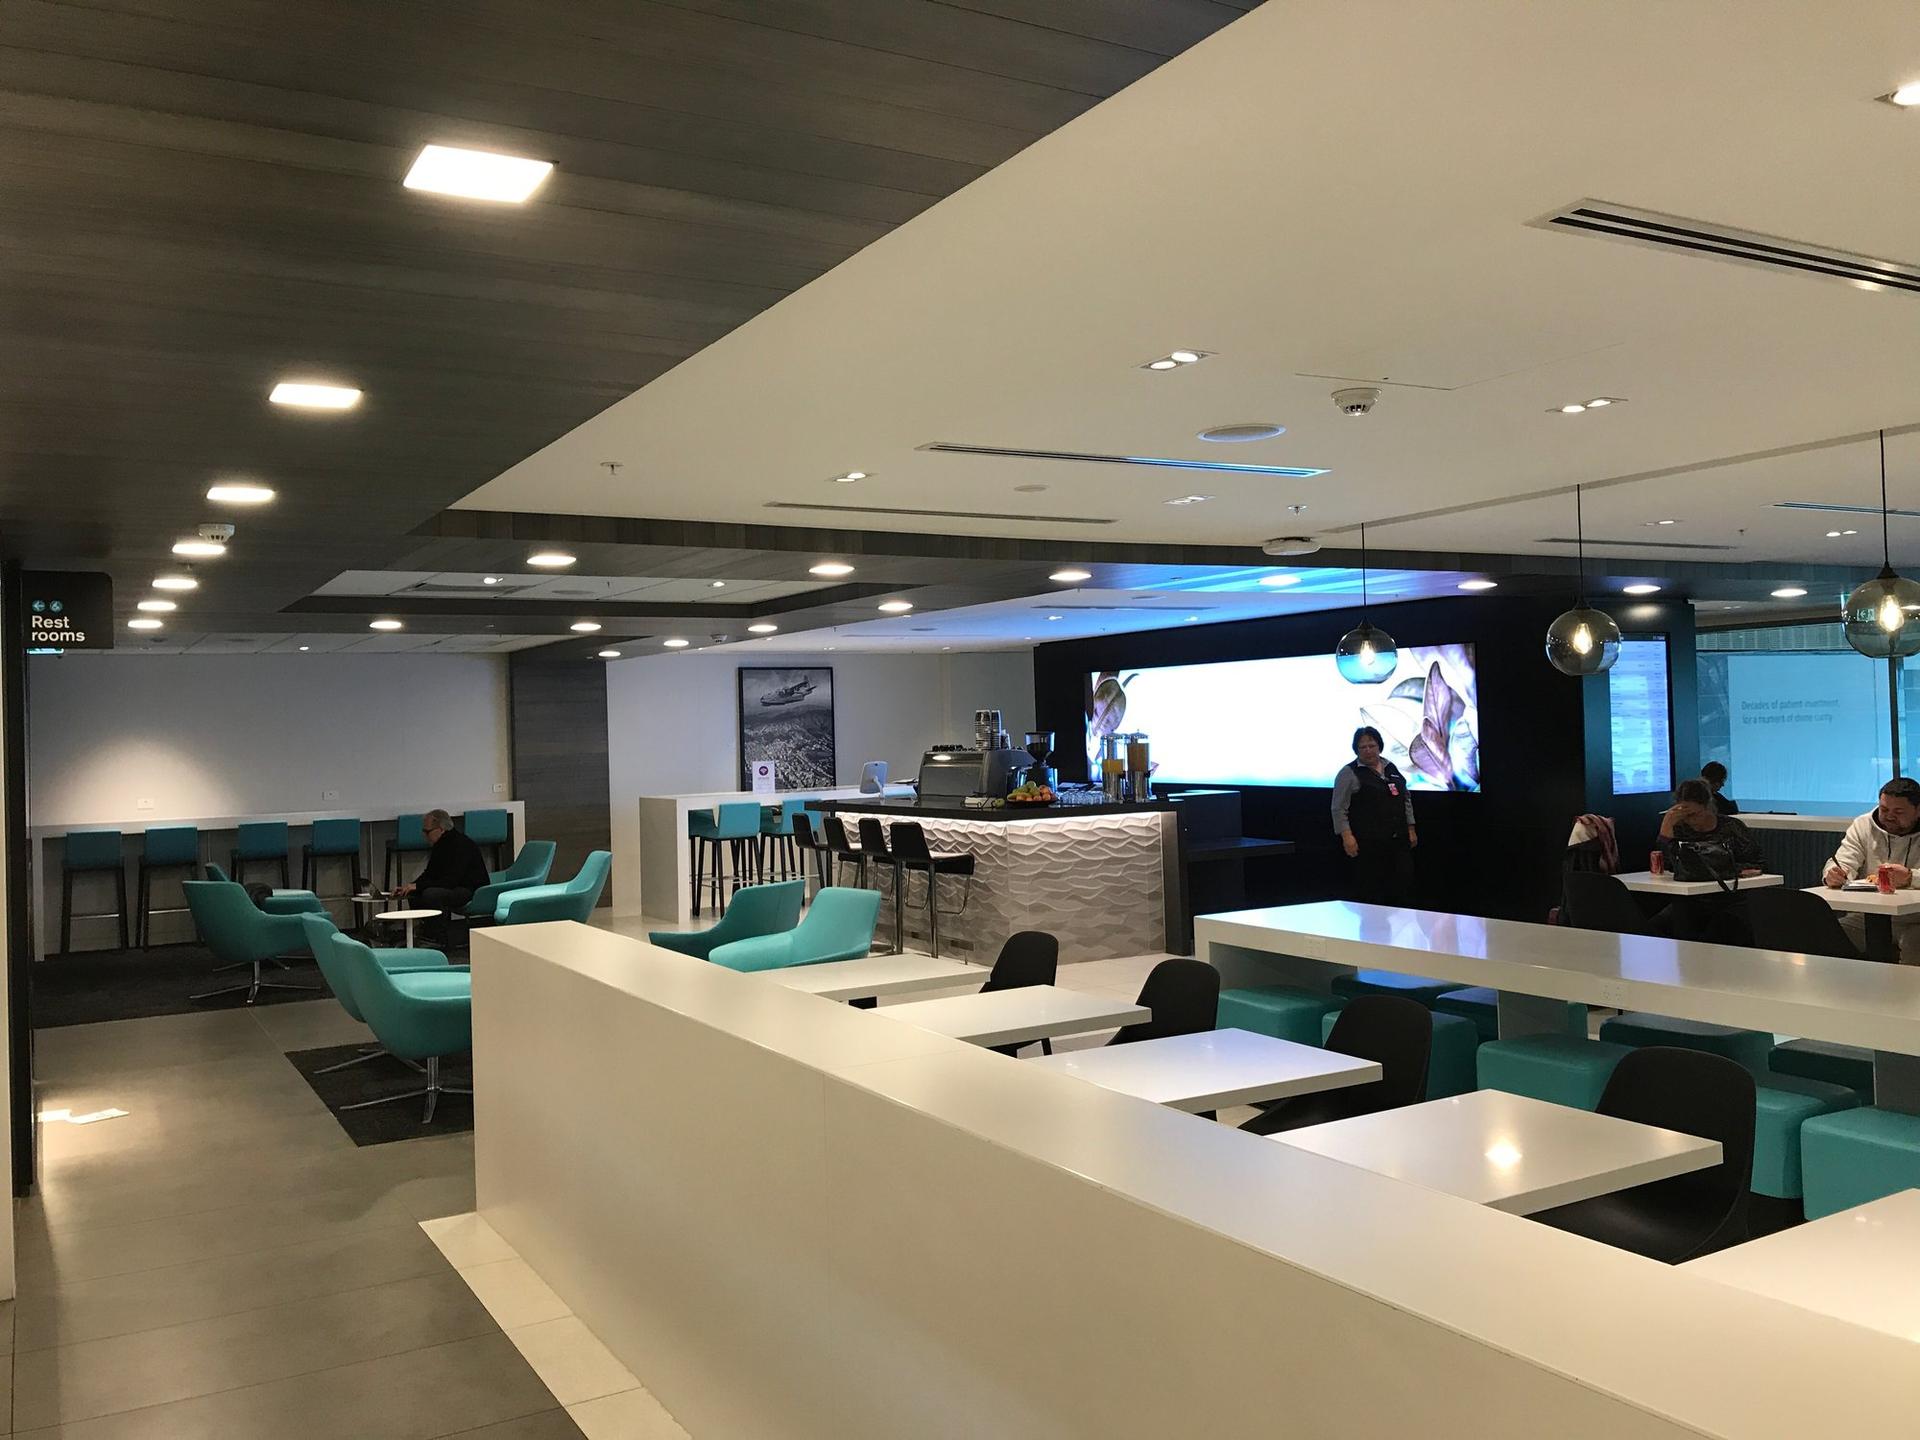 Air New Zealand Regional Lounge image 7 of 8